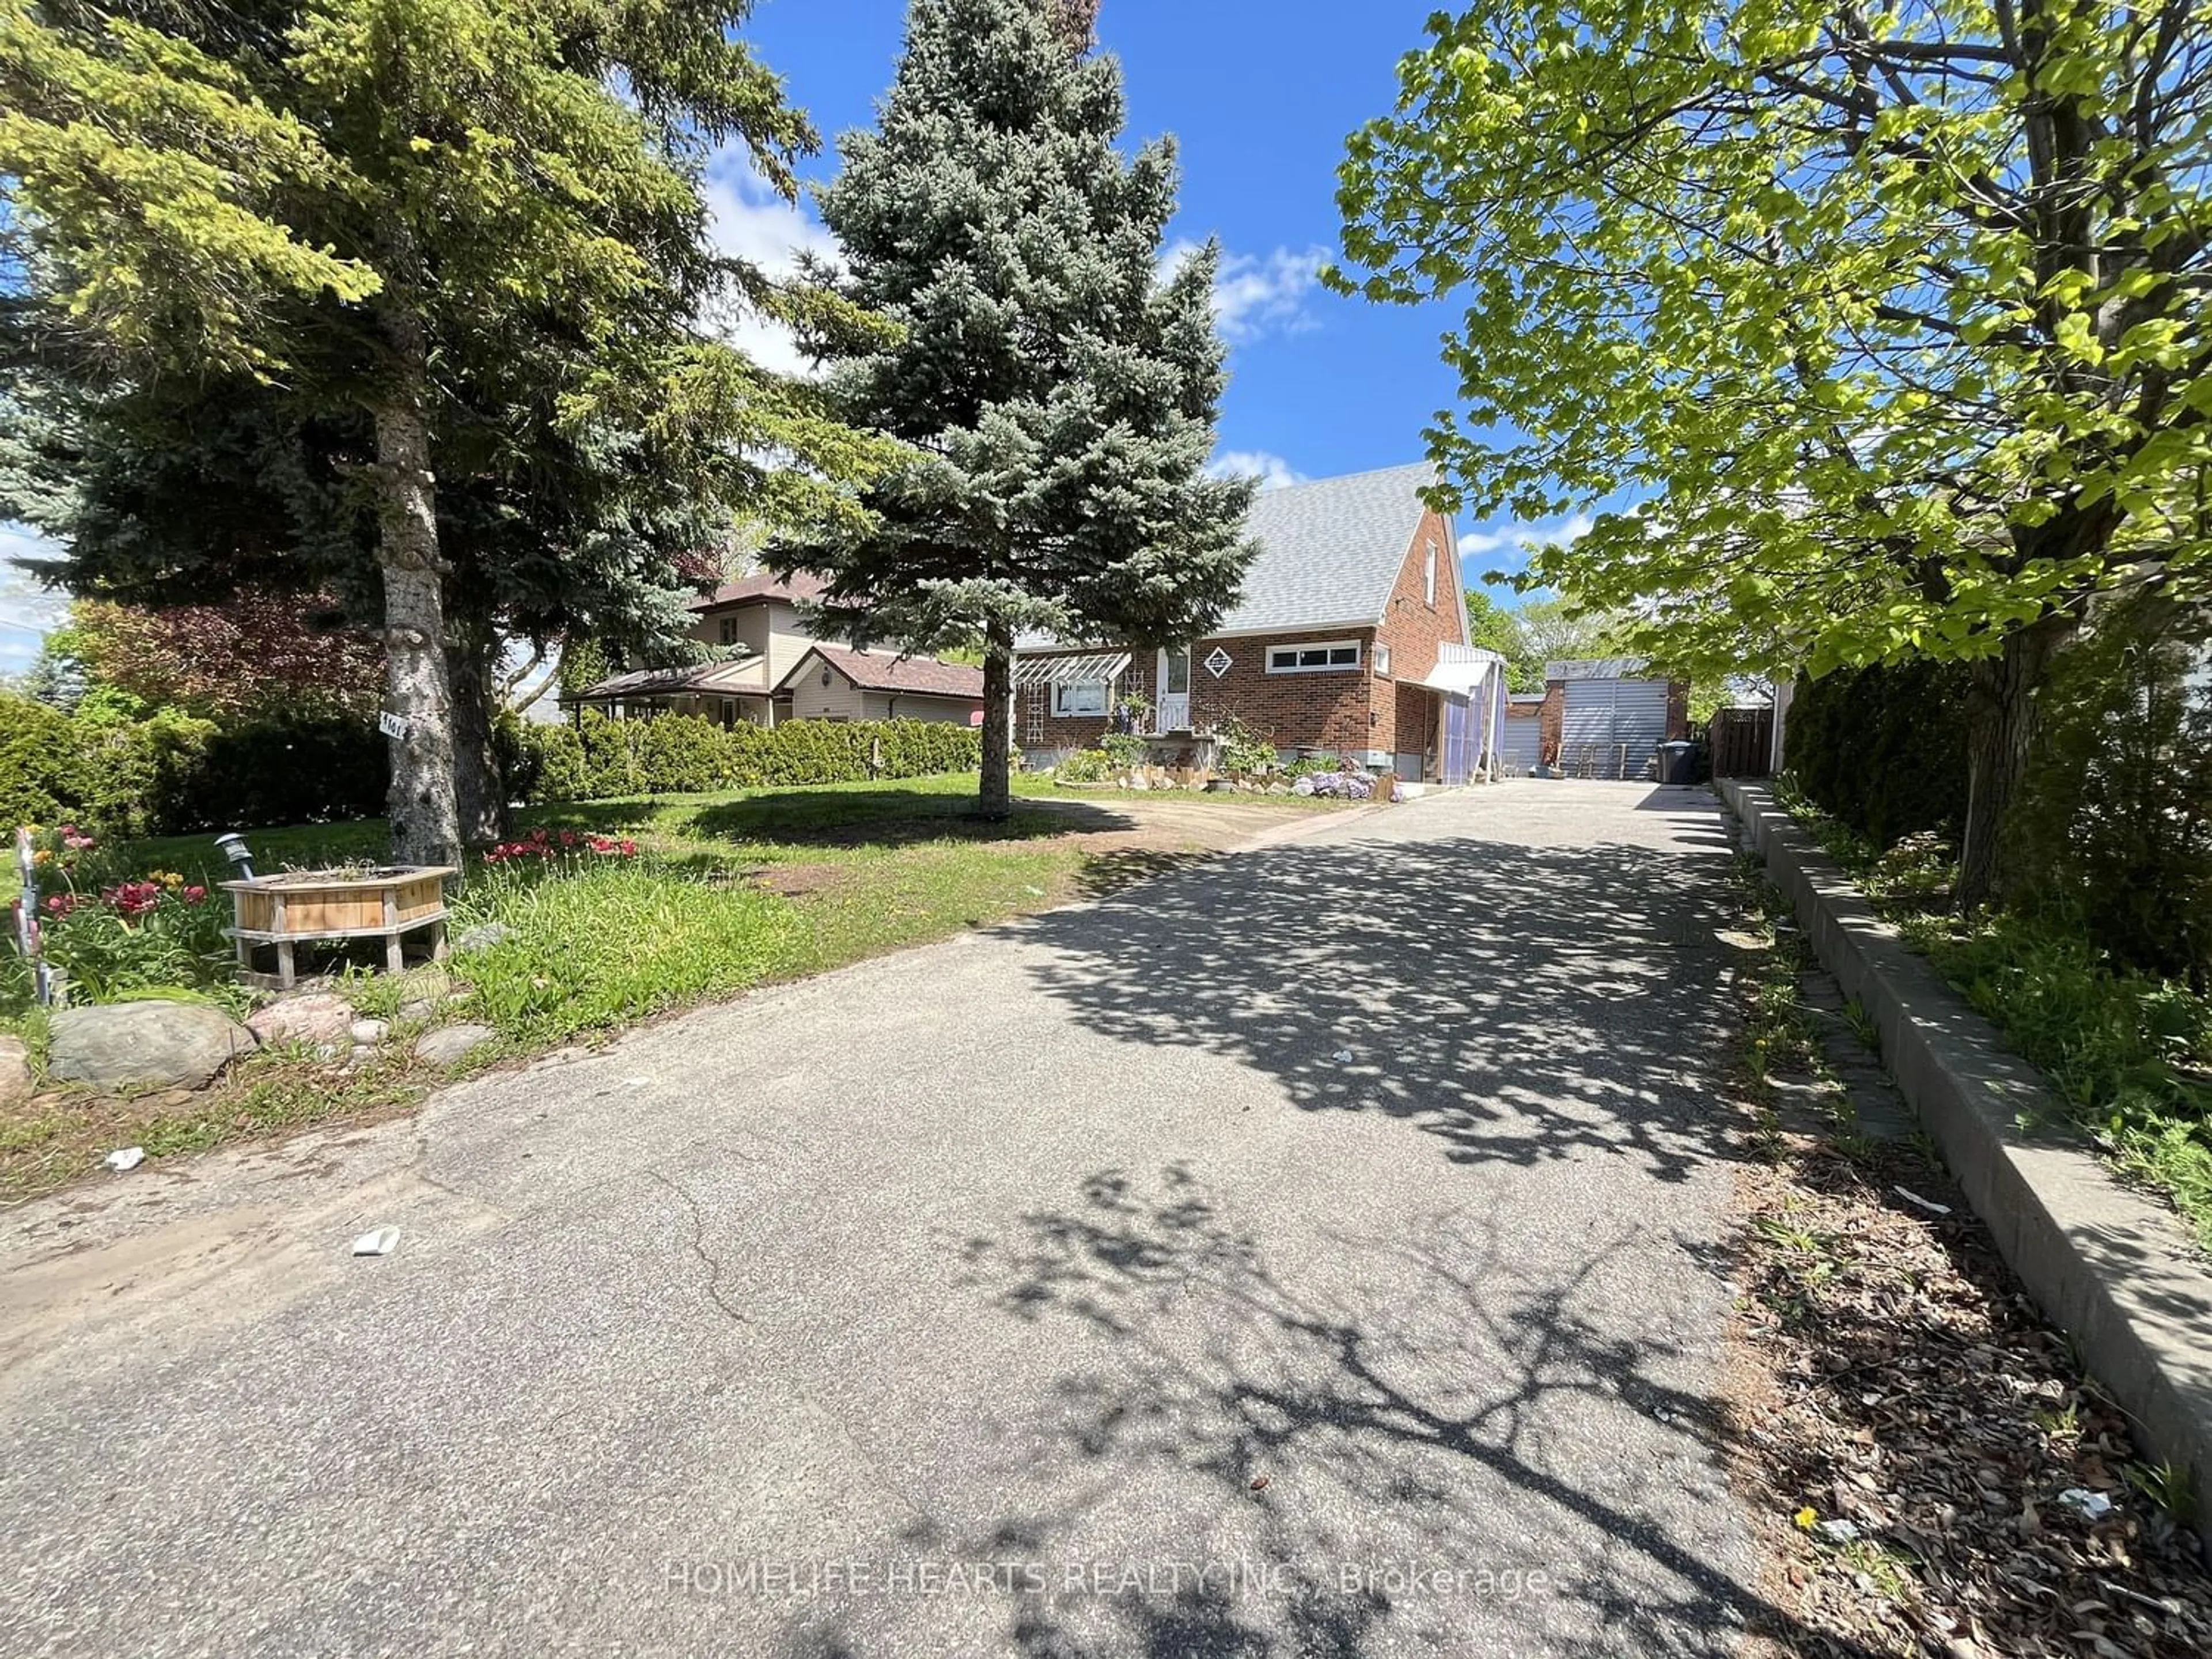 Fenced yard for 4101 Hickory Dr, Mississauga Ontario L4W 1L1